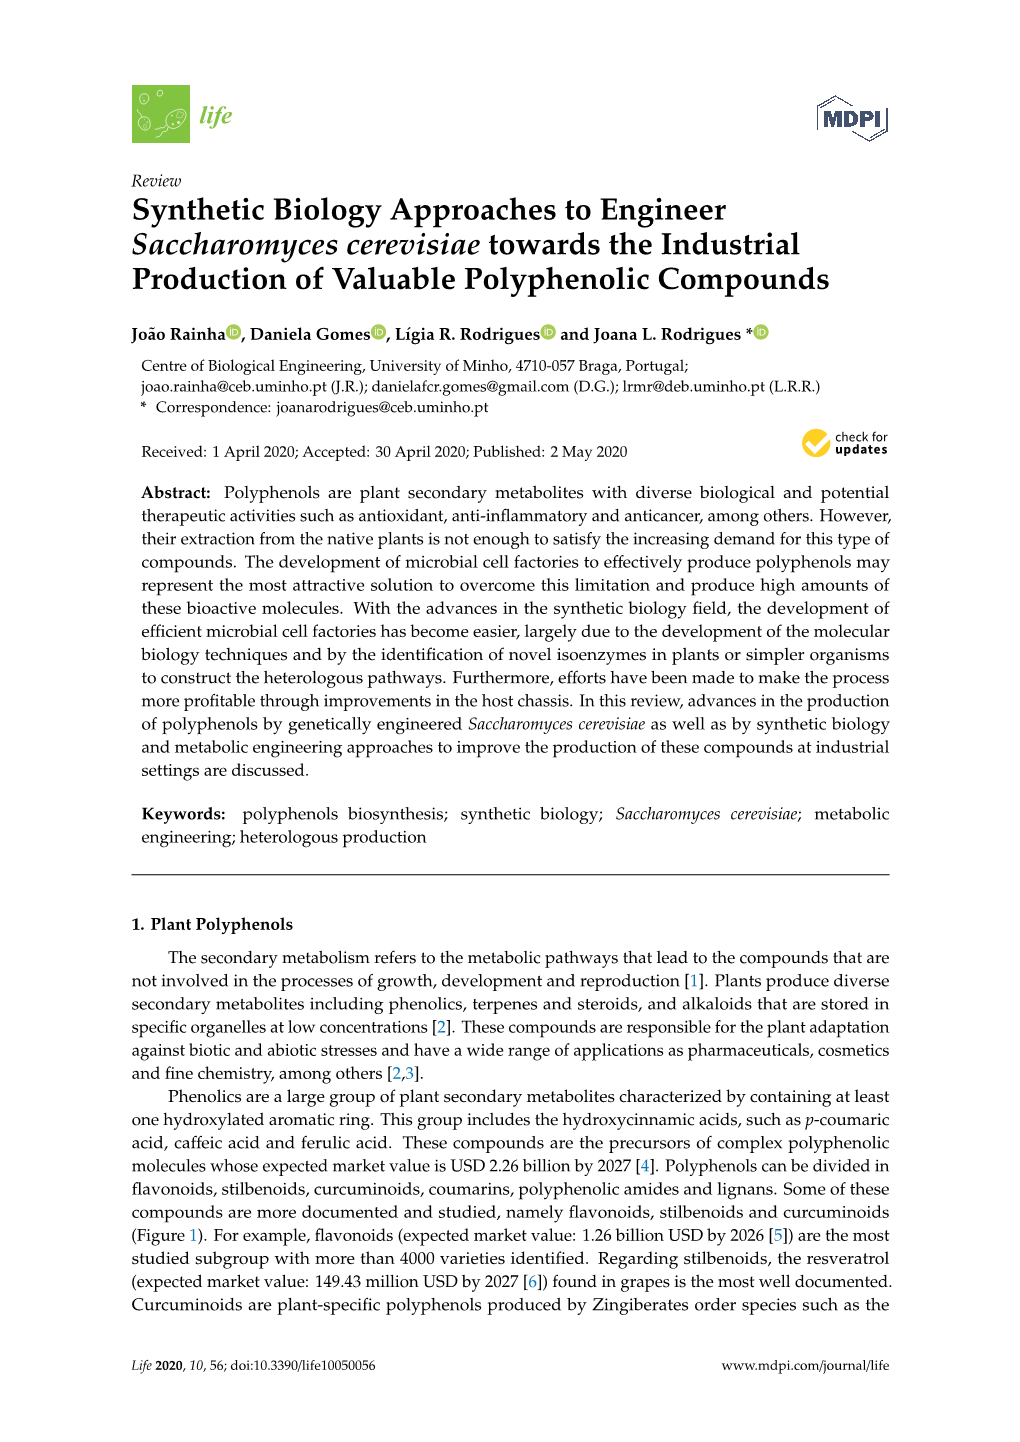 Synthetic Biology Approaches to Engineer Saccharomyces Cerevisiae Towards the Industrial Production of Valuable Polyphenolic Compounds